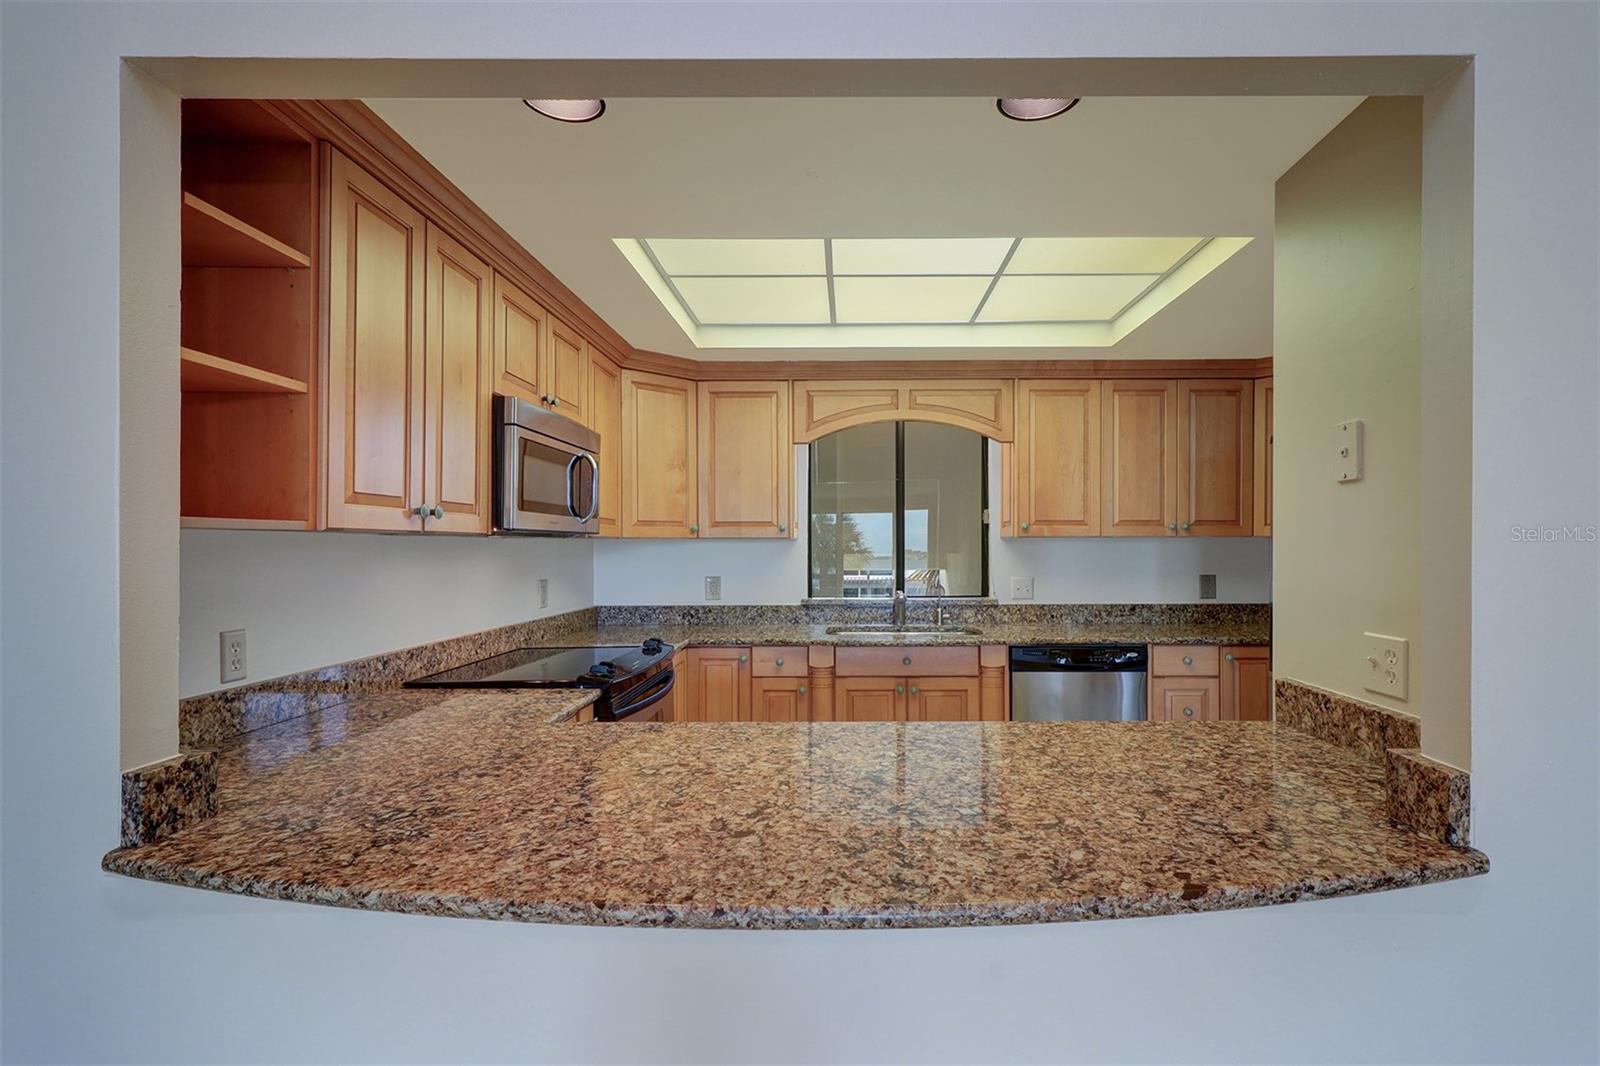 Granite kitchen counter with beautiful wood cabinetry and stainless steel appliances